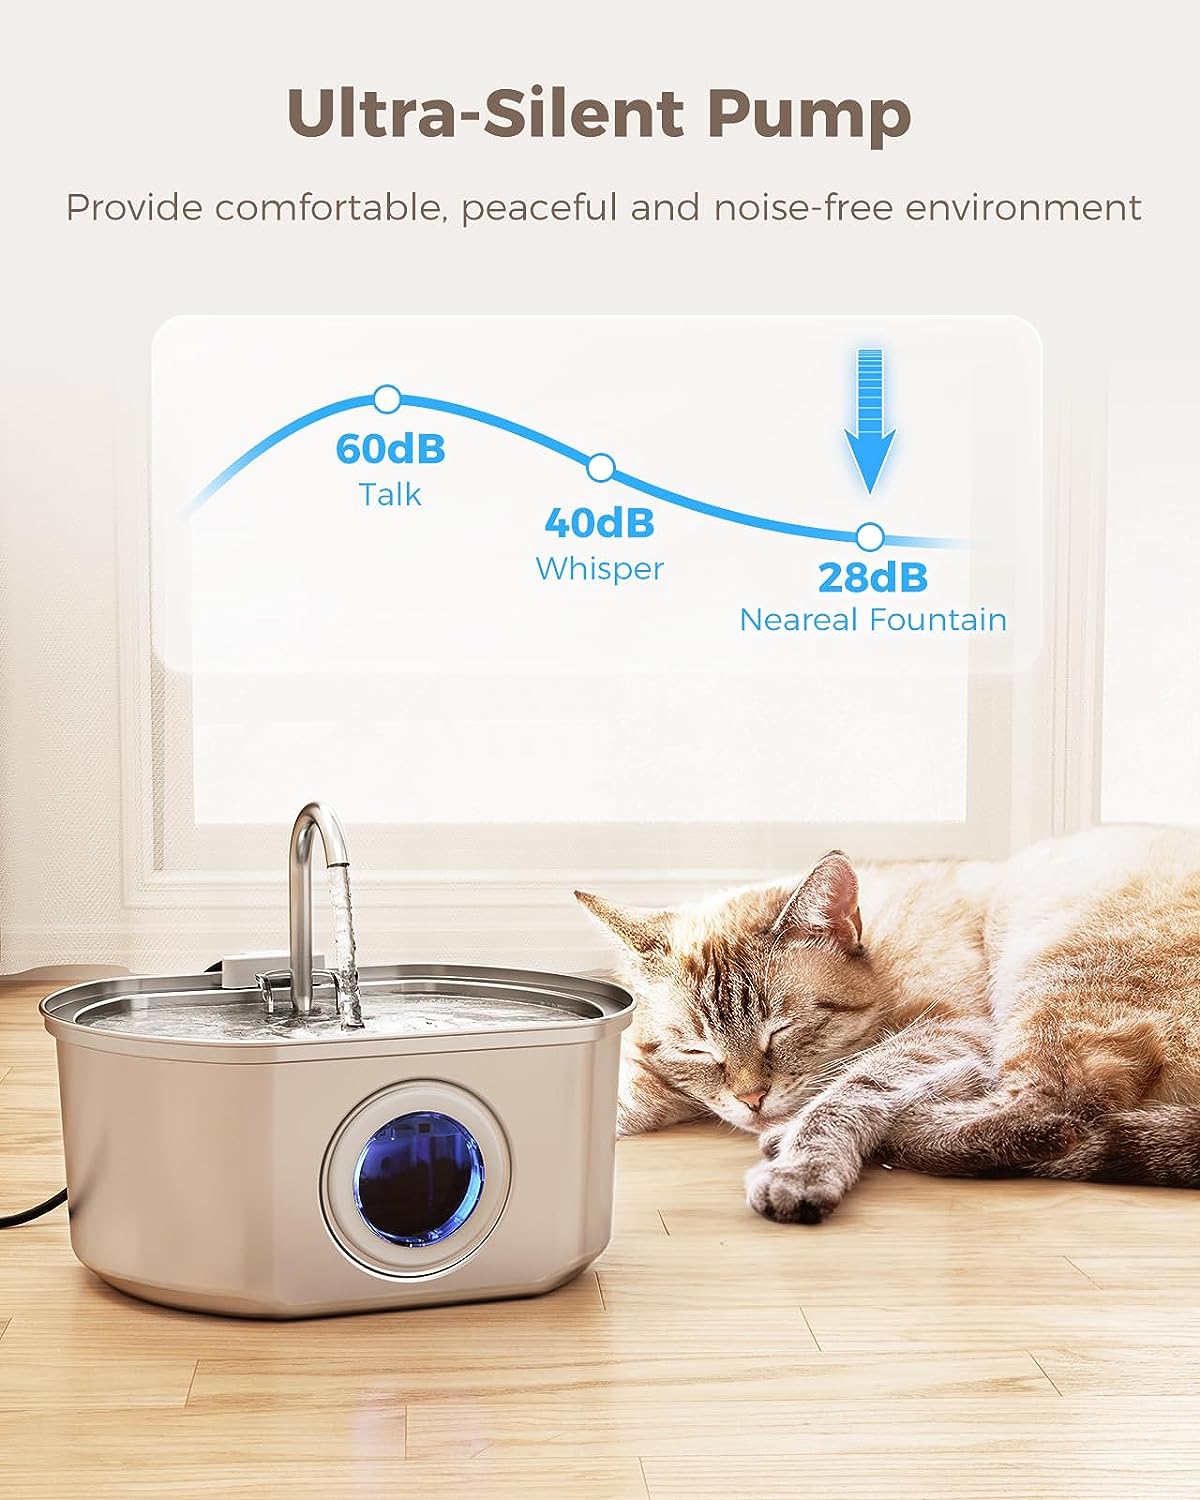 Cat Water Fountain Stainless Steel: 108oz/3.2L Cat Fountain for Drinking- Pet Water Fountain for Cats Inside - Automatic Cat Water Dispenser Bowl - Cat Feeding & Watering Supplies - Water Level Window